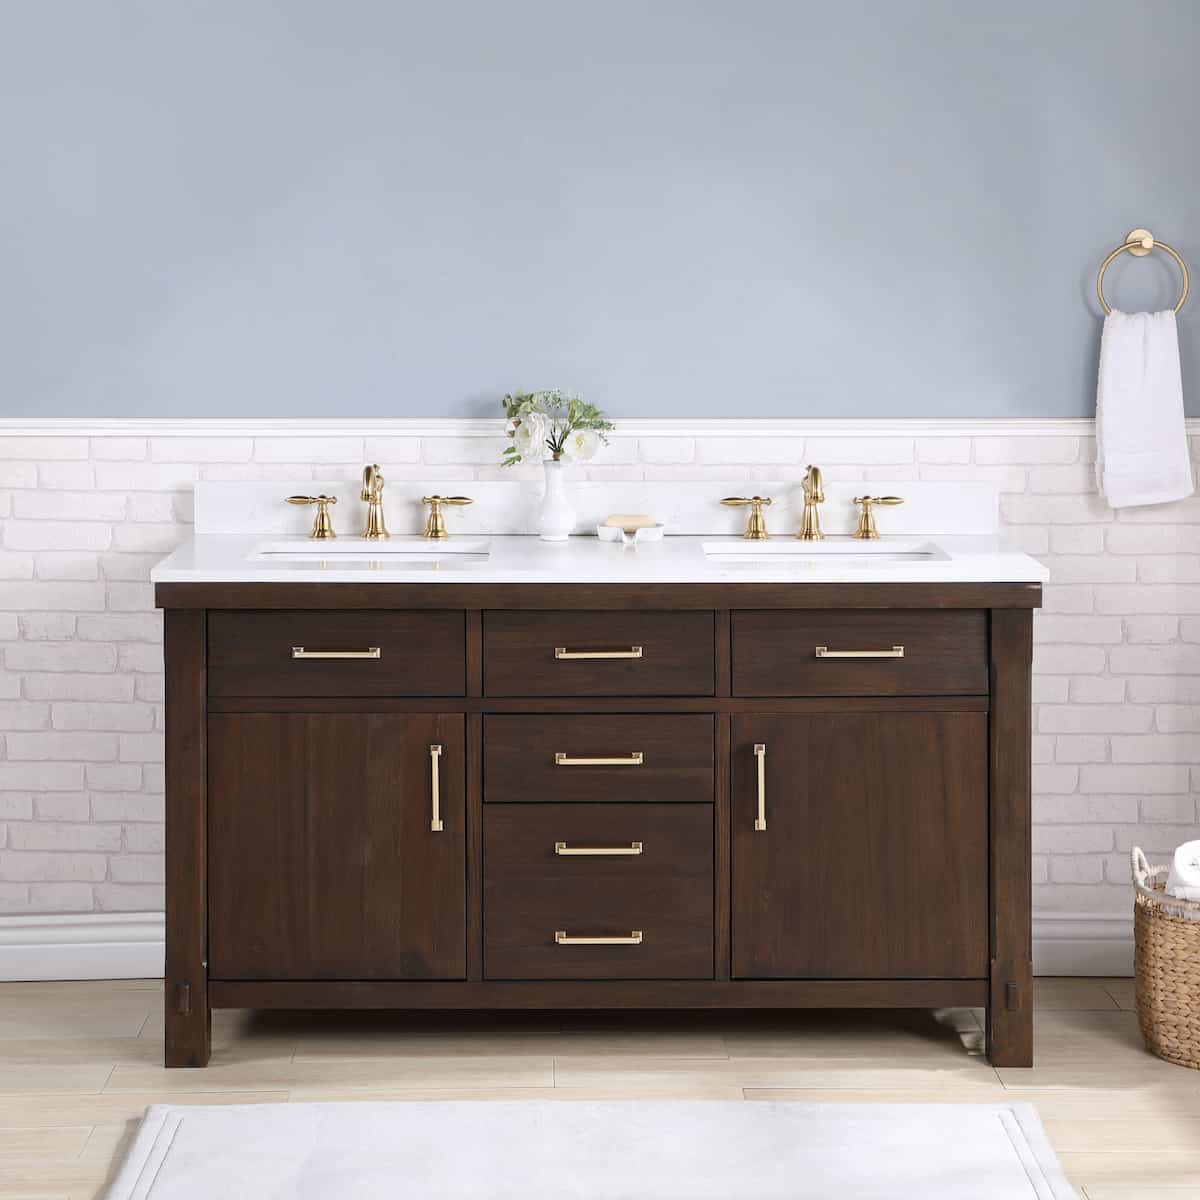 Vinnova Viella 60 Inch Double Sink Bath Vanity in Deep Walnut with White Composite Countertop Without Mirror in Bathroom 701860-DW-WS-NM